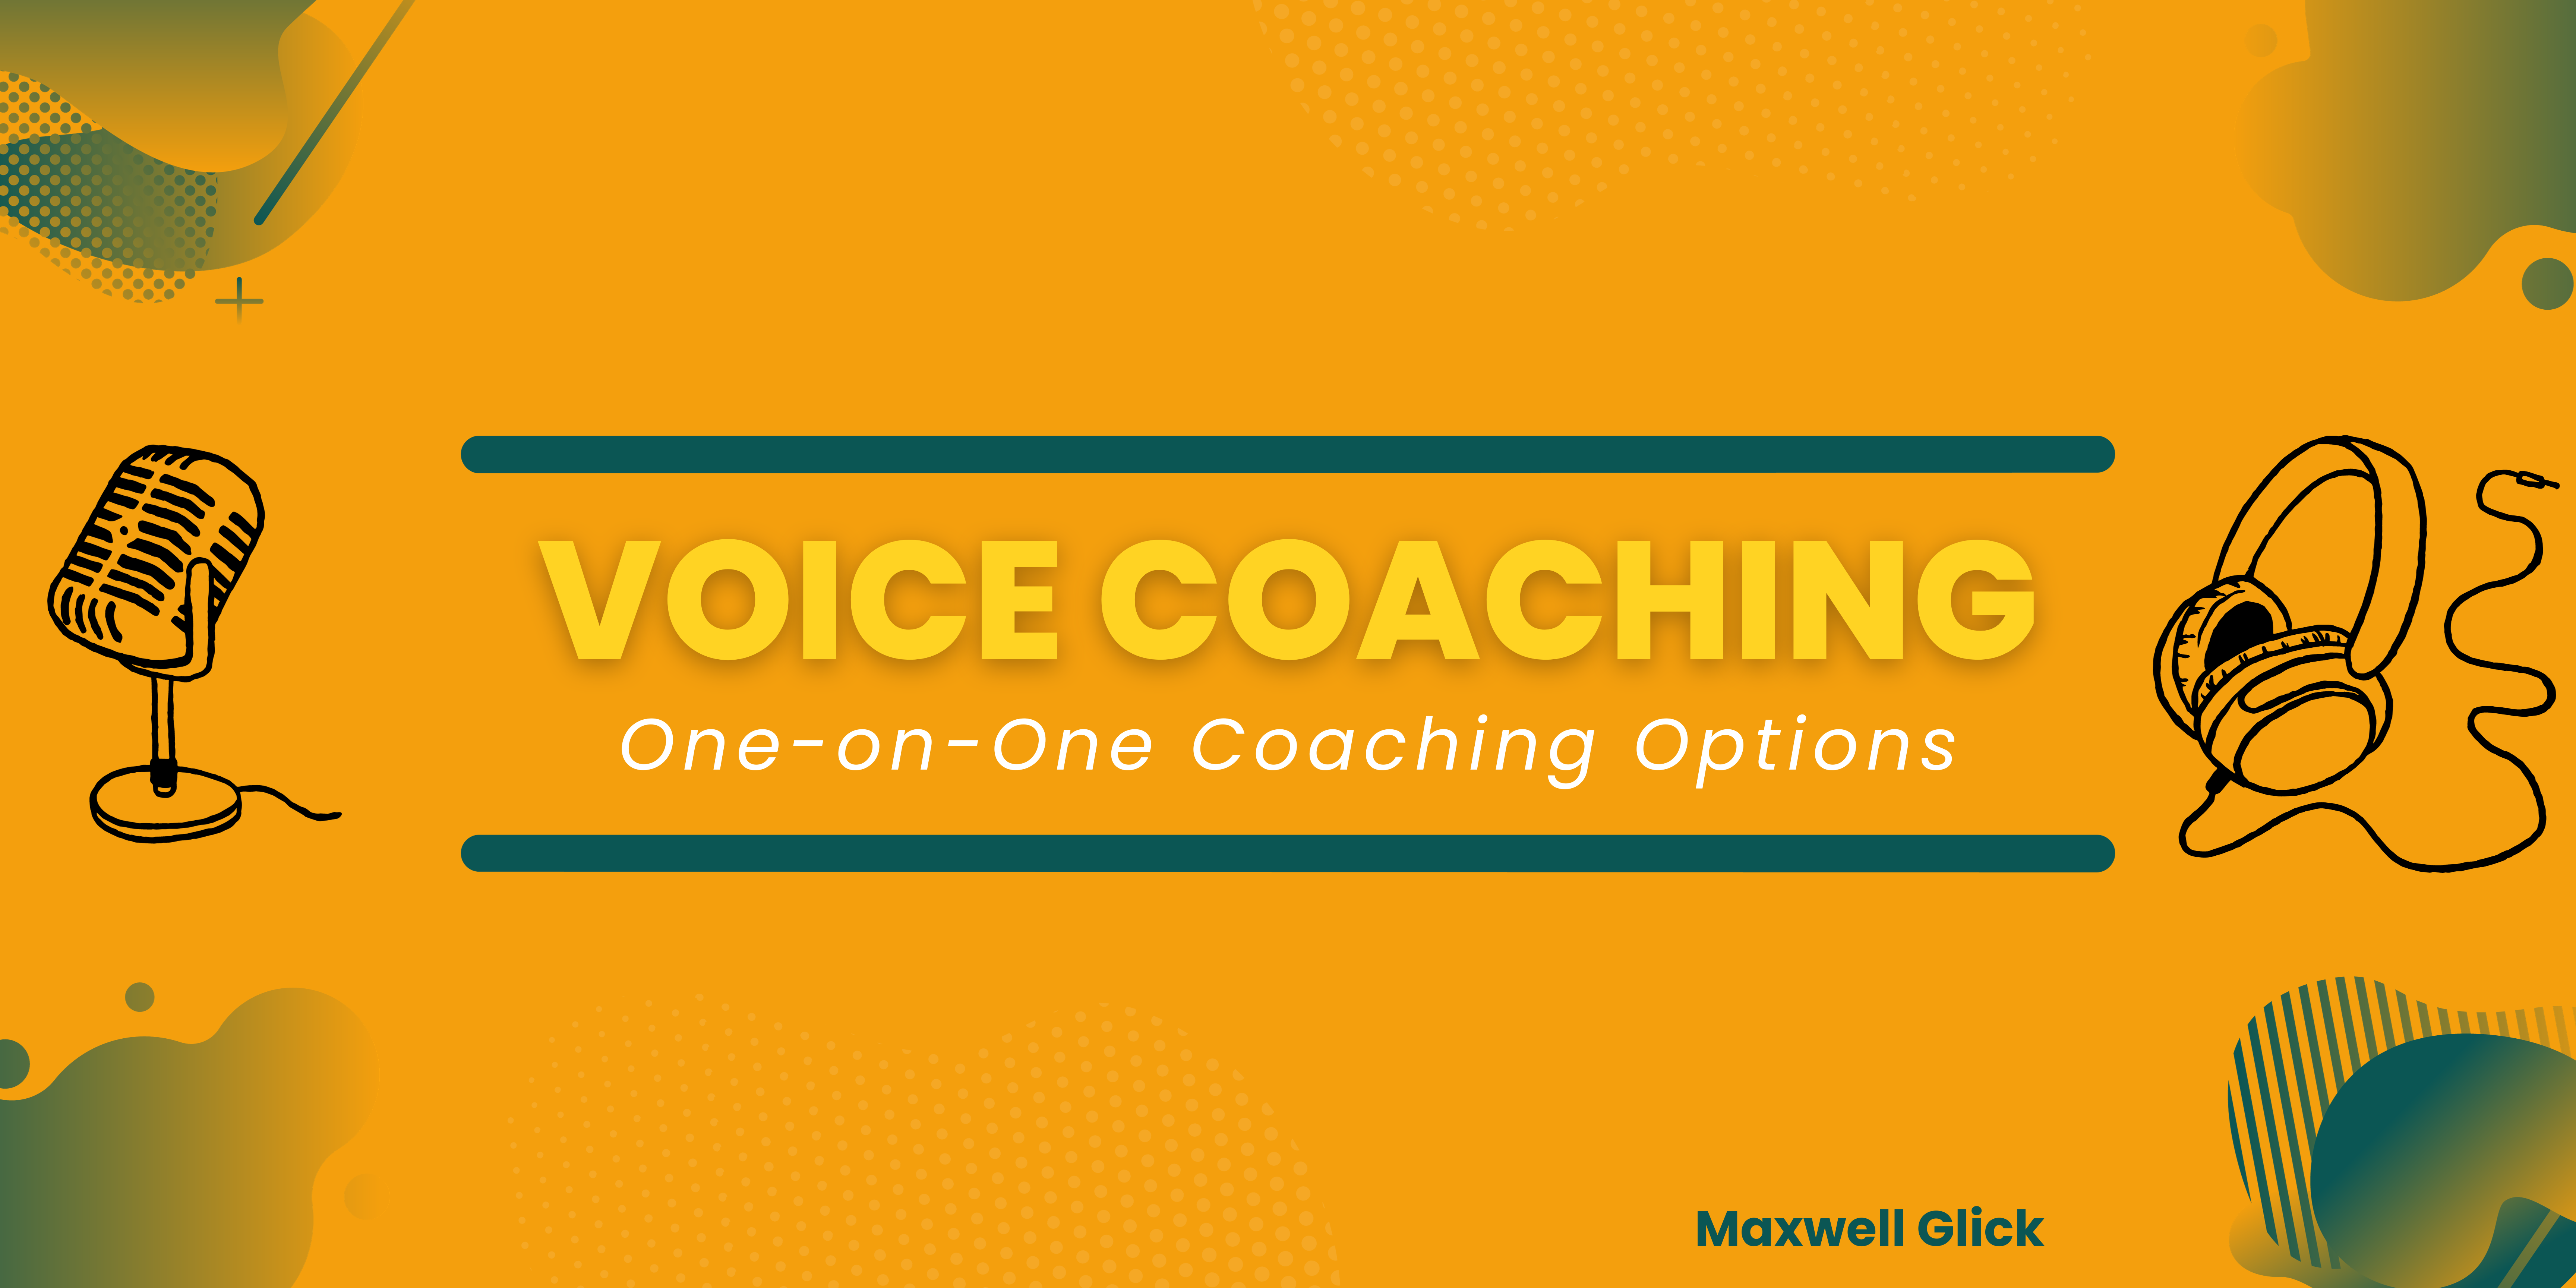 Maxwell Glick voice coaching banner with orange background.